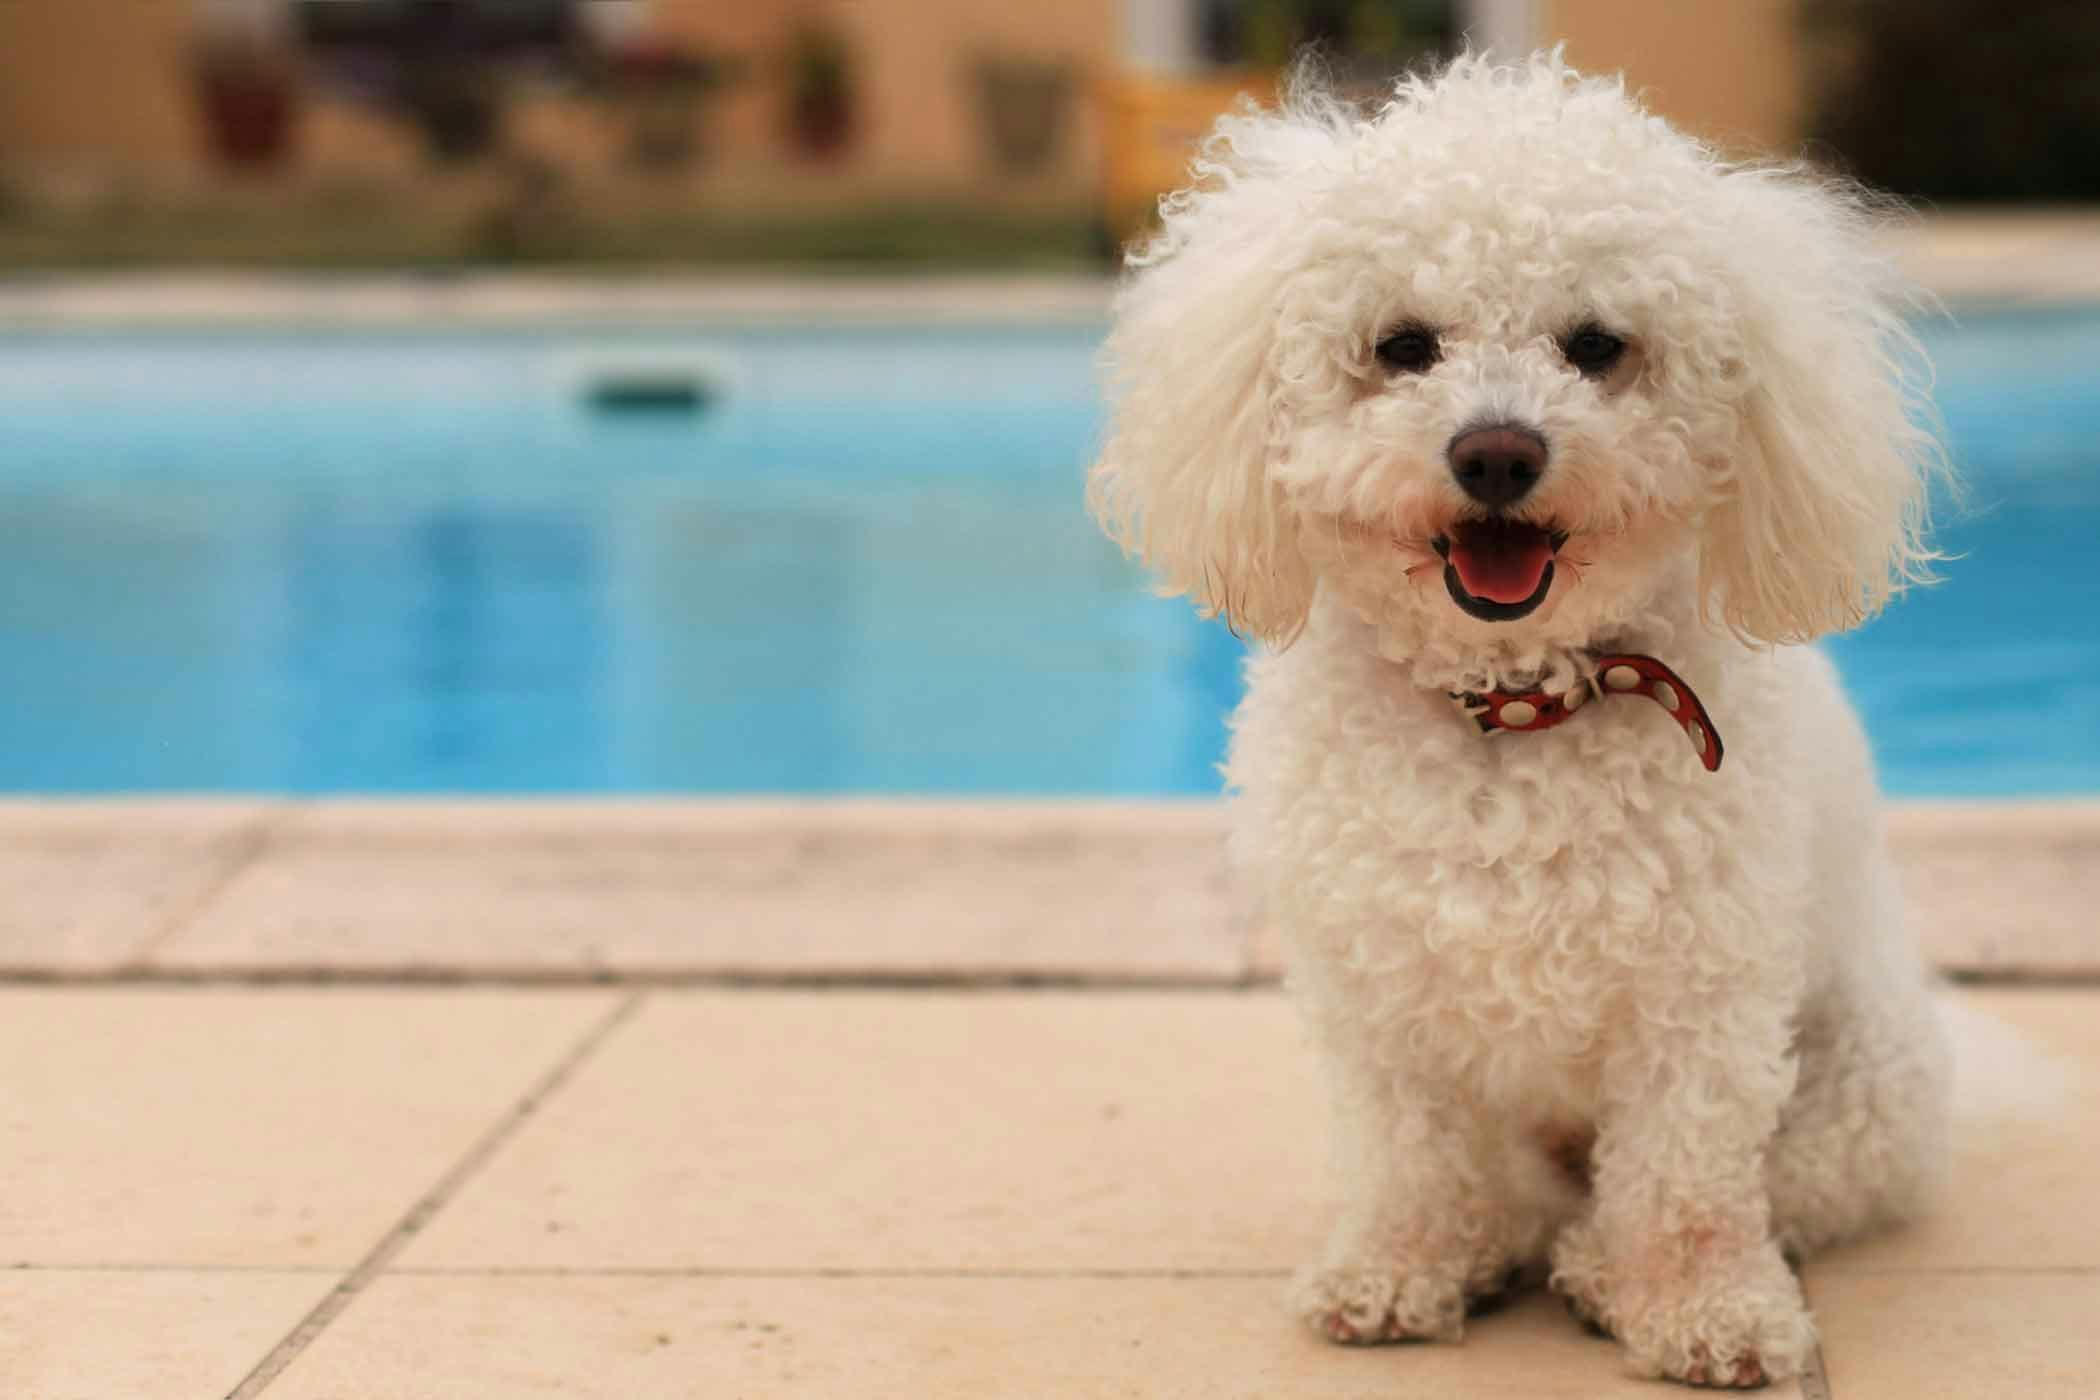 How to Train Your Dog to Stay Off a Pool Cover | Wag!